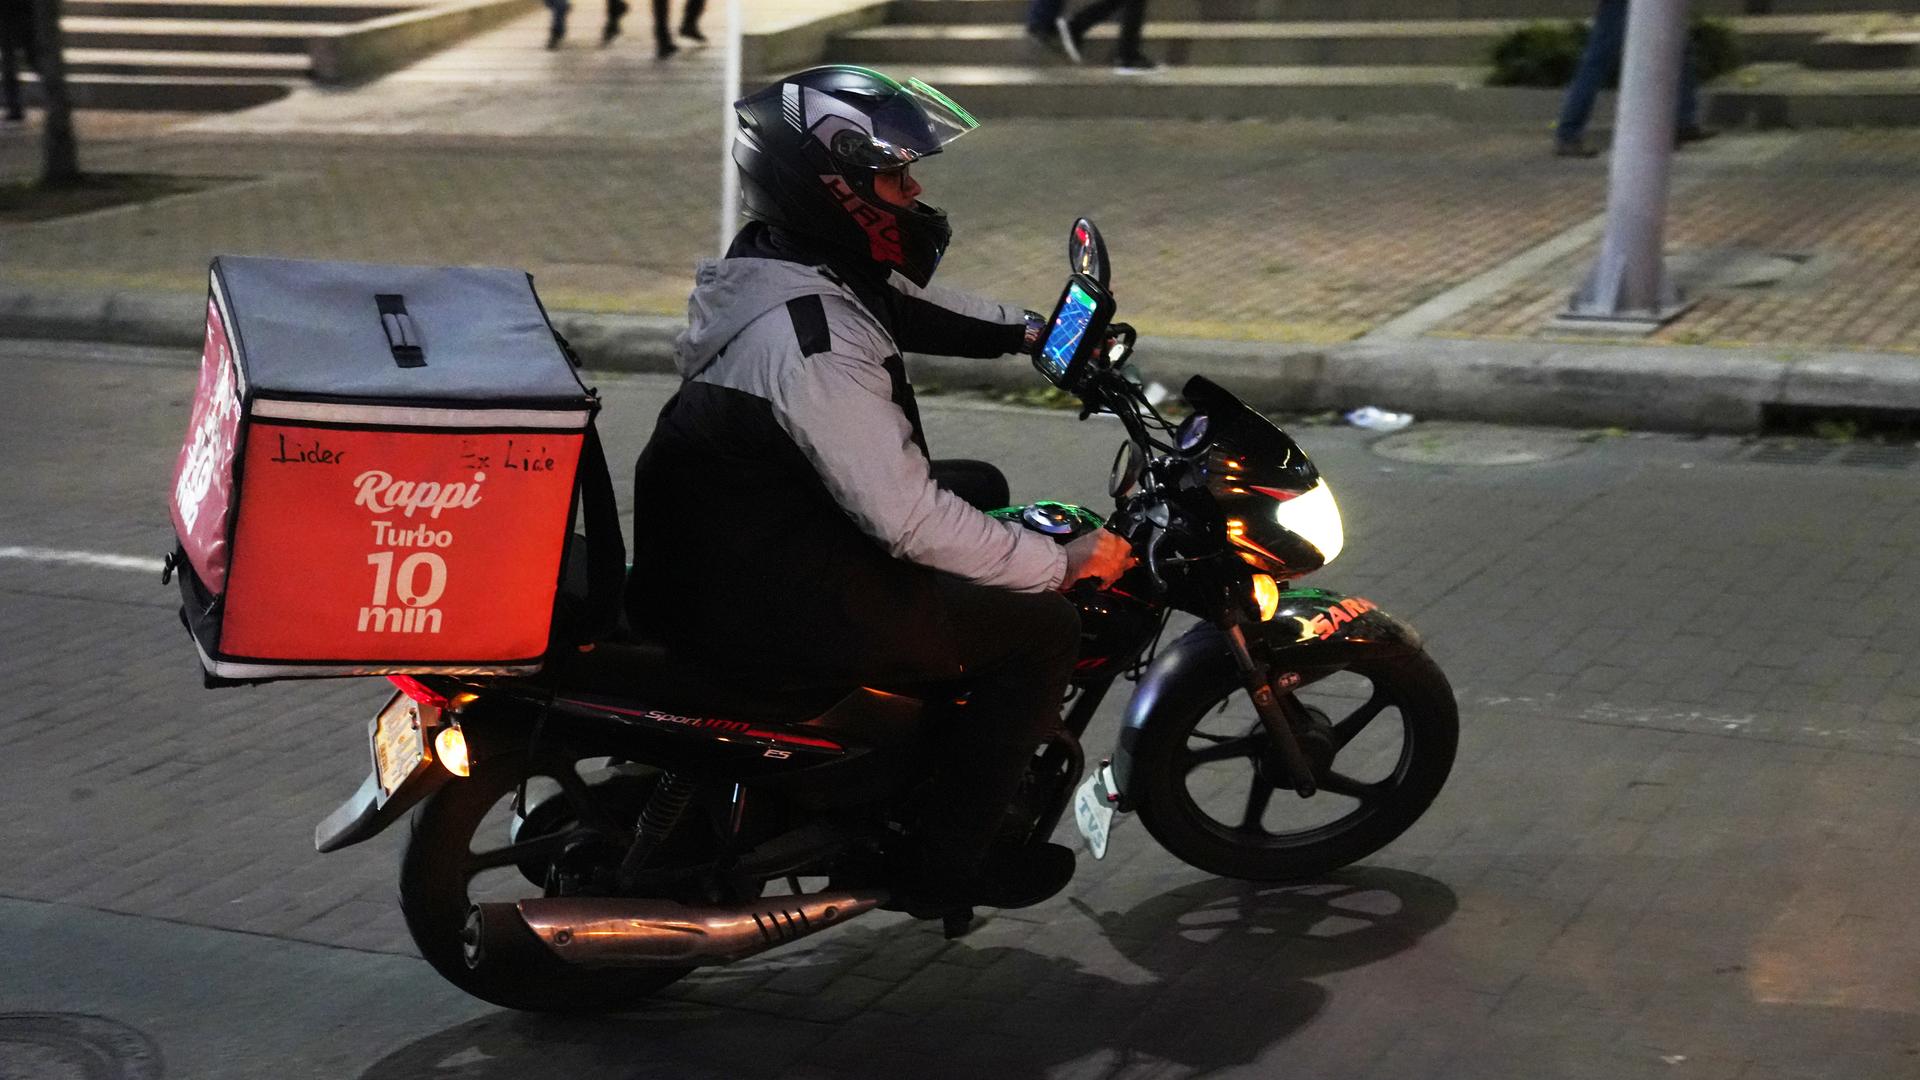 A fully-covered man riding a motorbike in the street at night